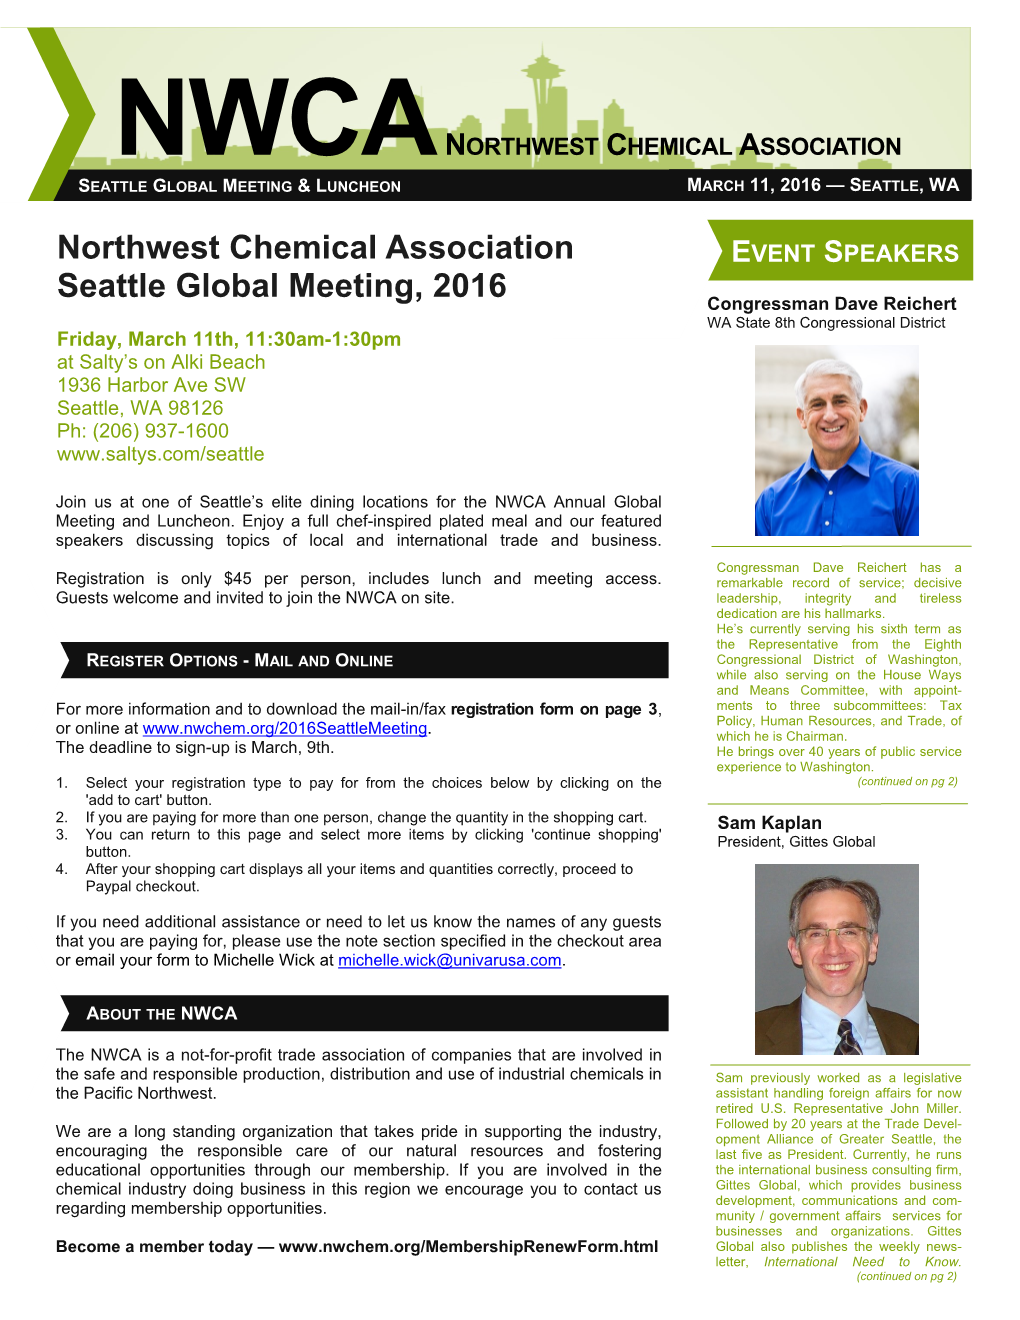 Northwest Chemical Association Seattle Global Meeting, 2016